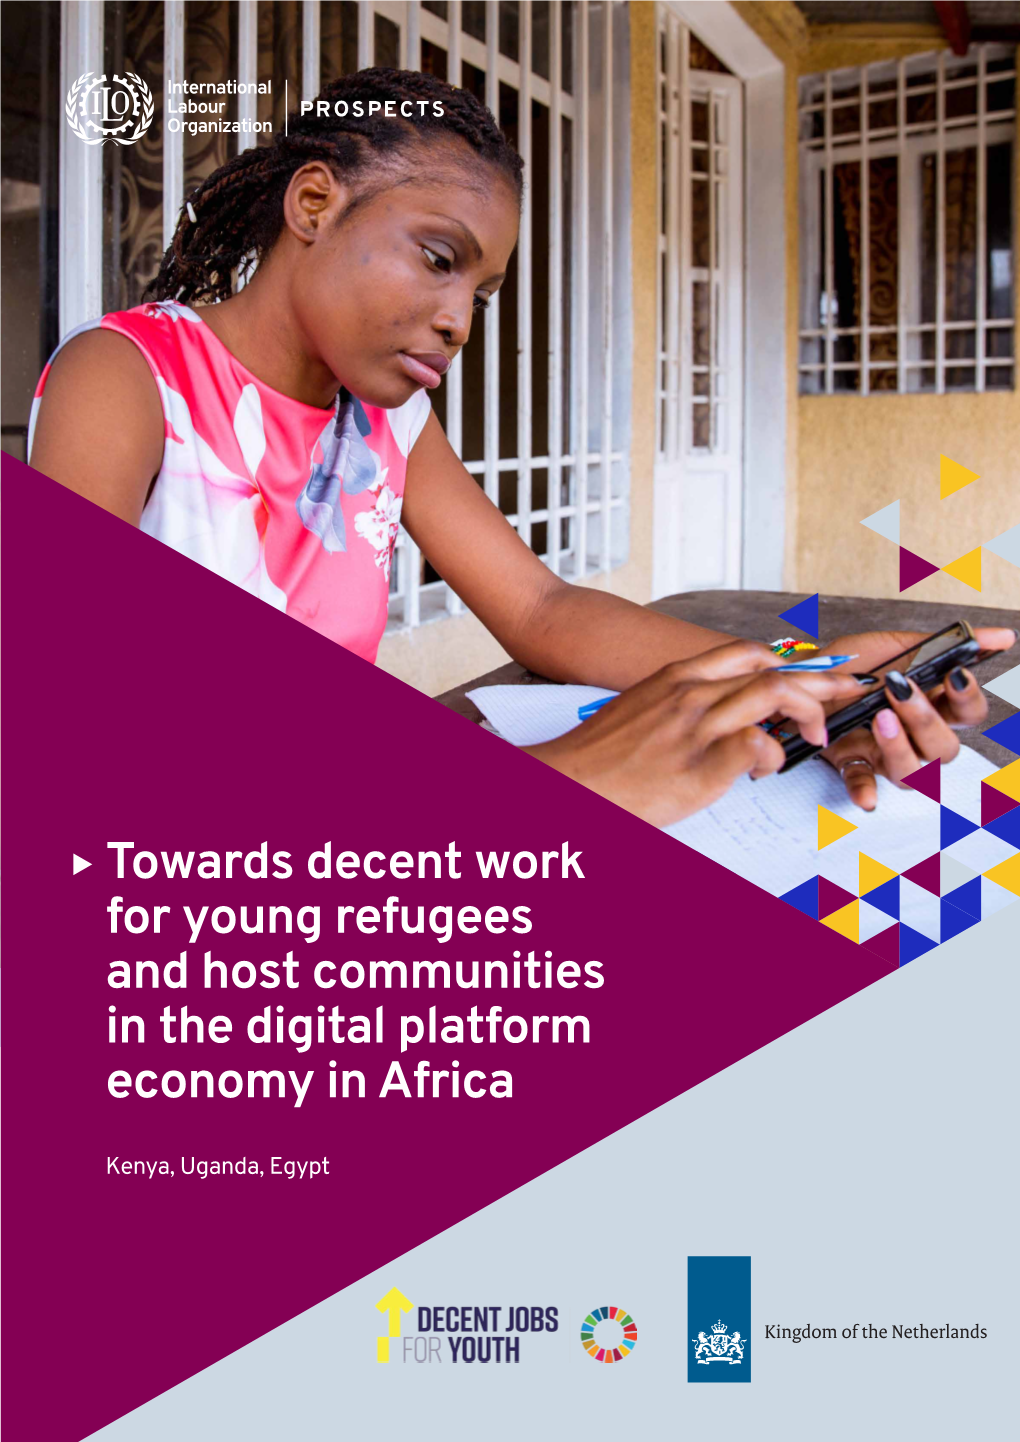 ILO PROSPECTS | Towards Decent Work for Young Refugees and Host Communities in the Digital Platform Economy in Africa